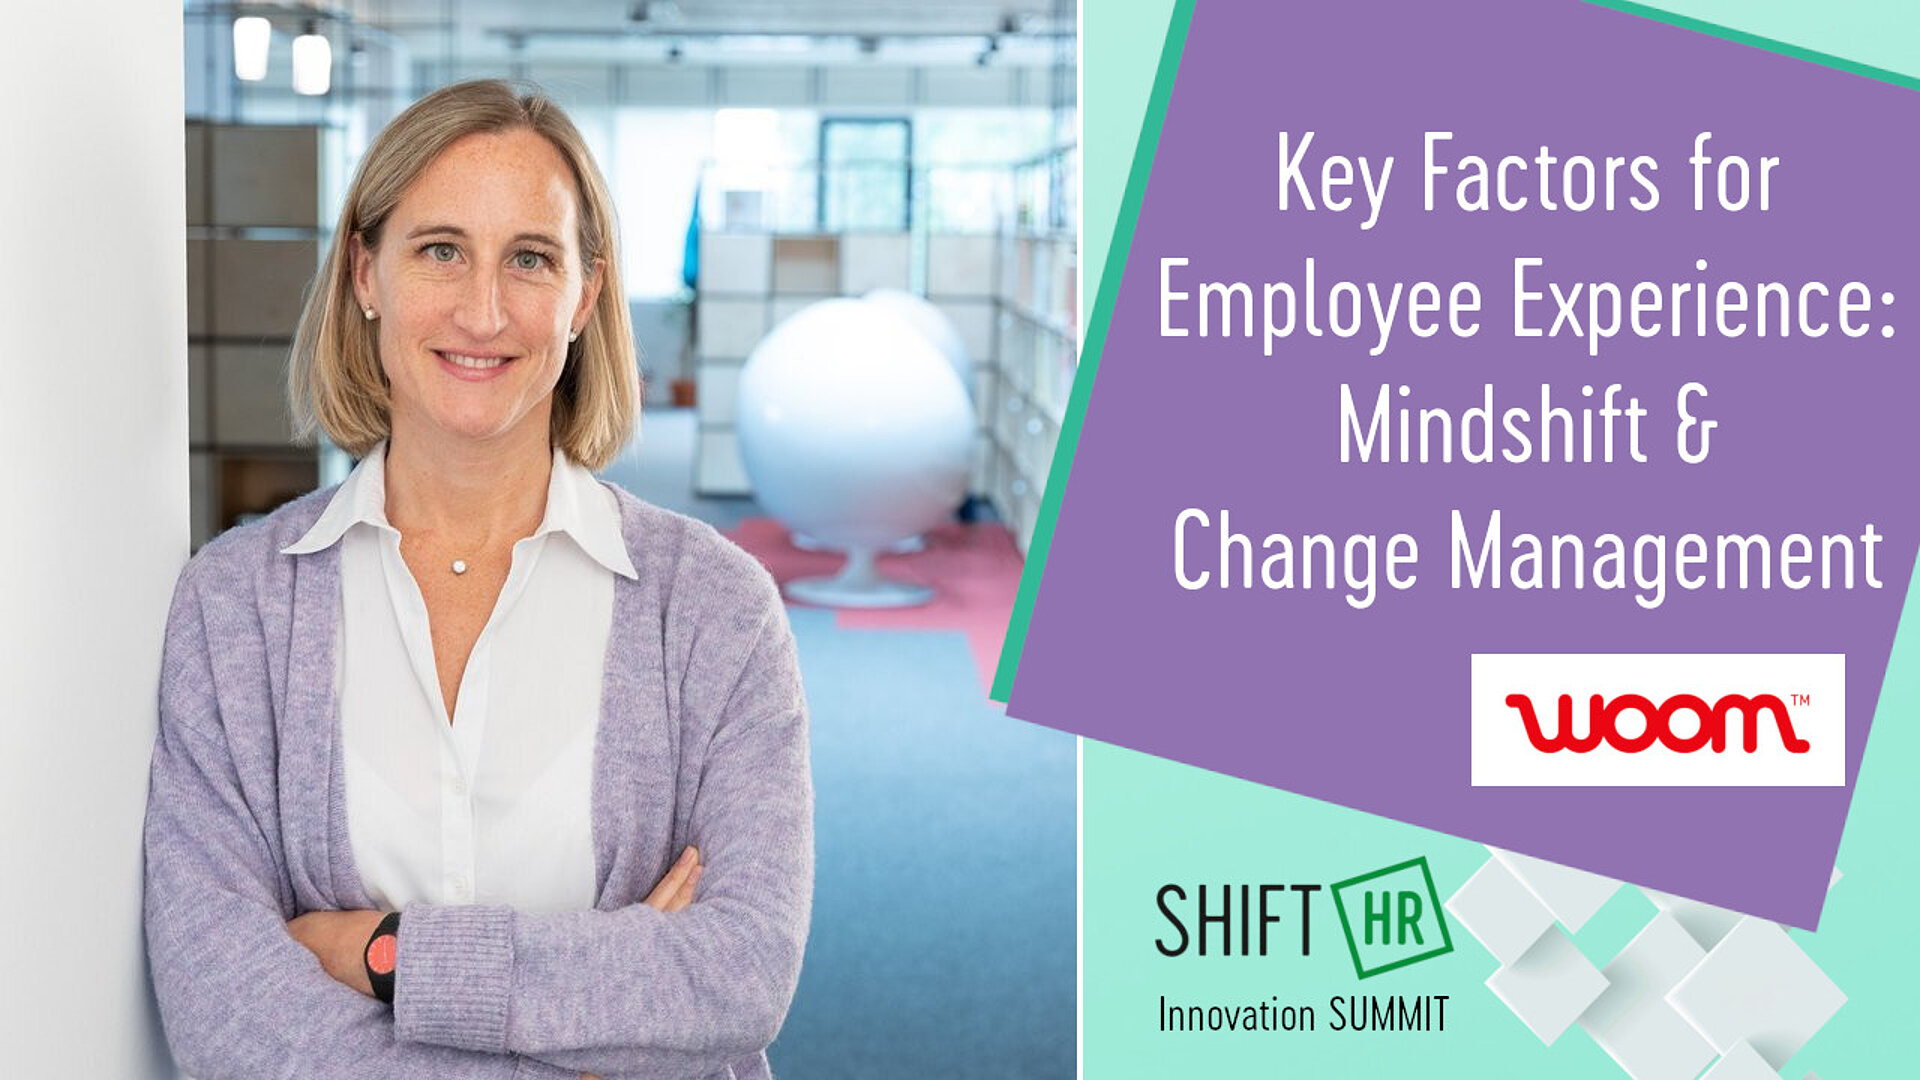 Key Factors for Employee Experience: mind shift & change management